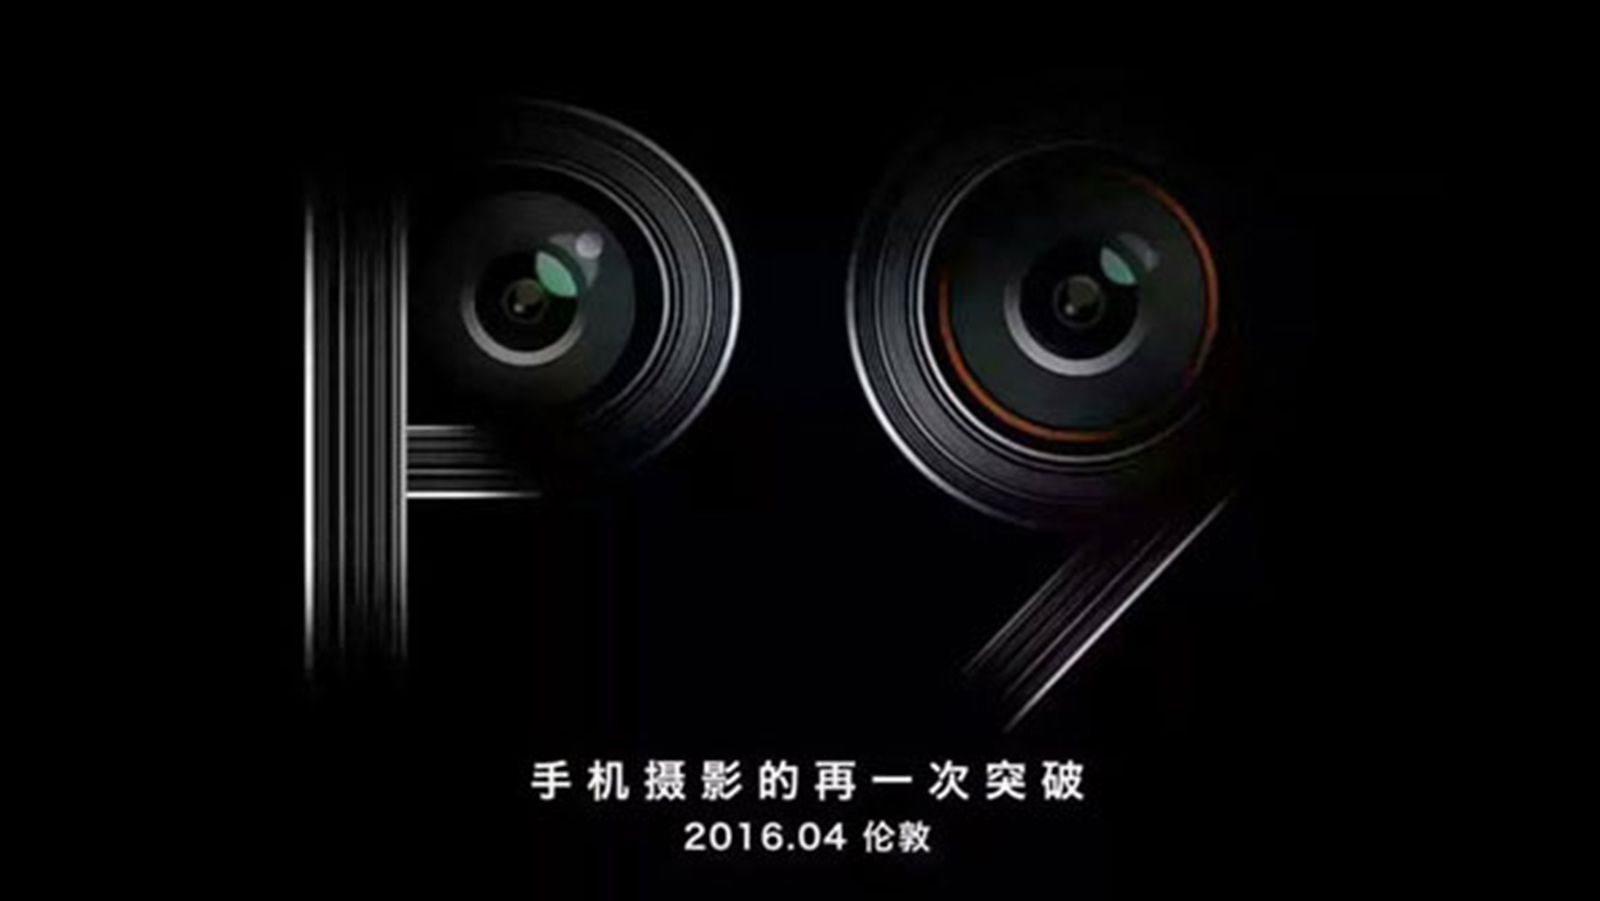 huawei p9 confirmed to feature dual cameras hints at leica tech image 1